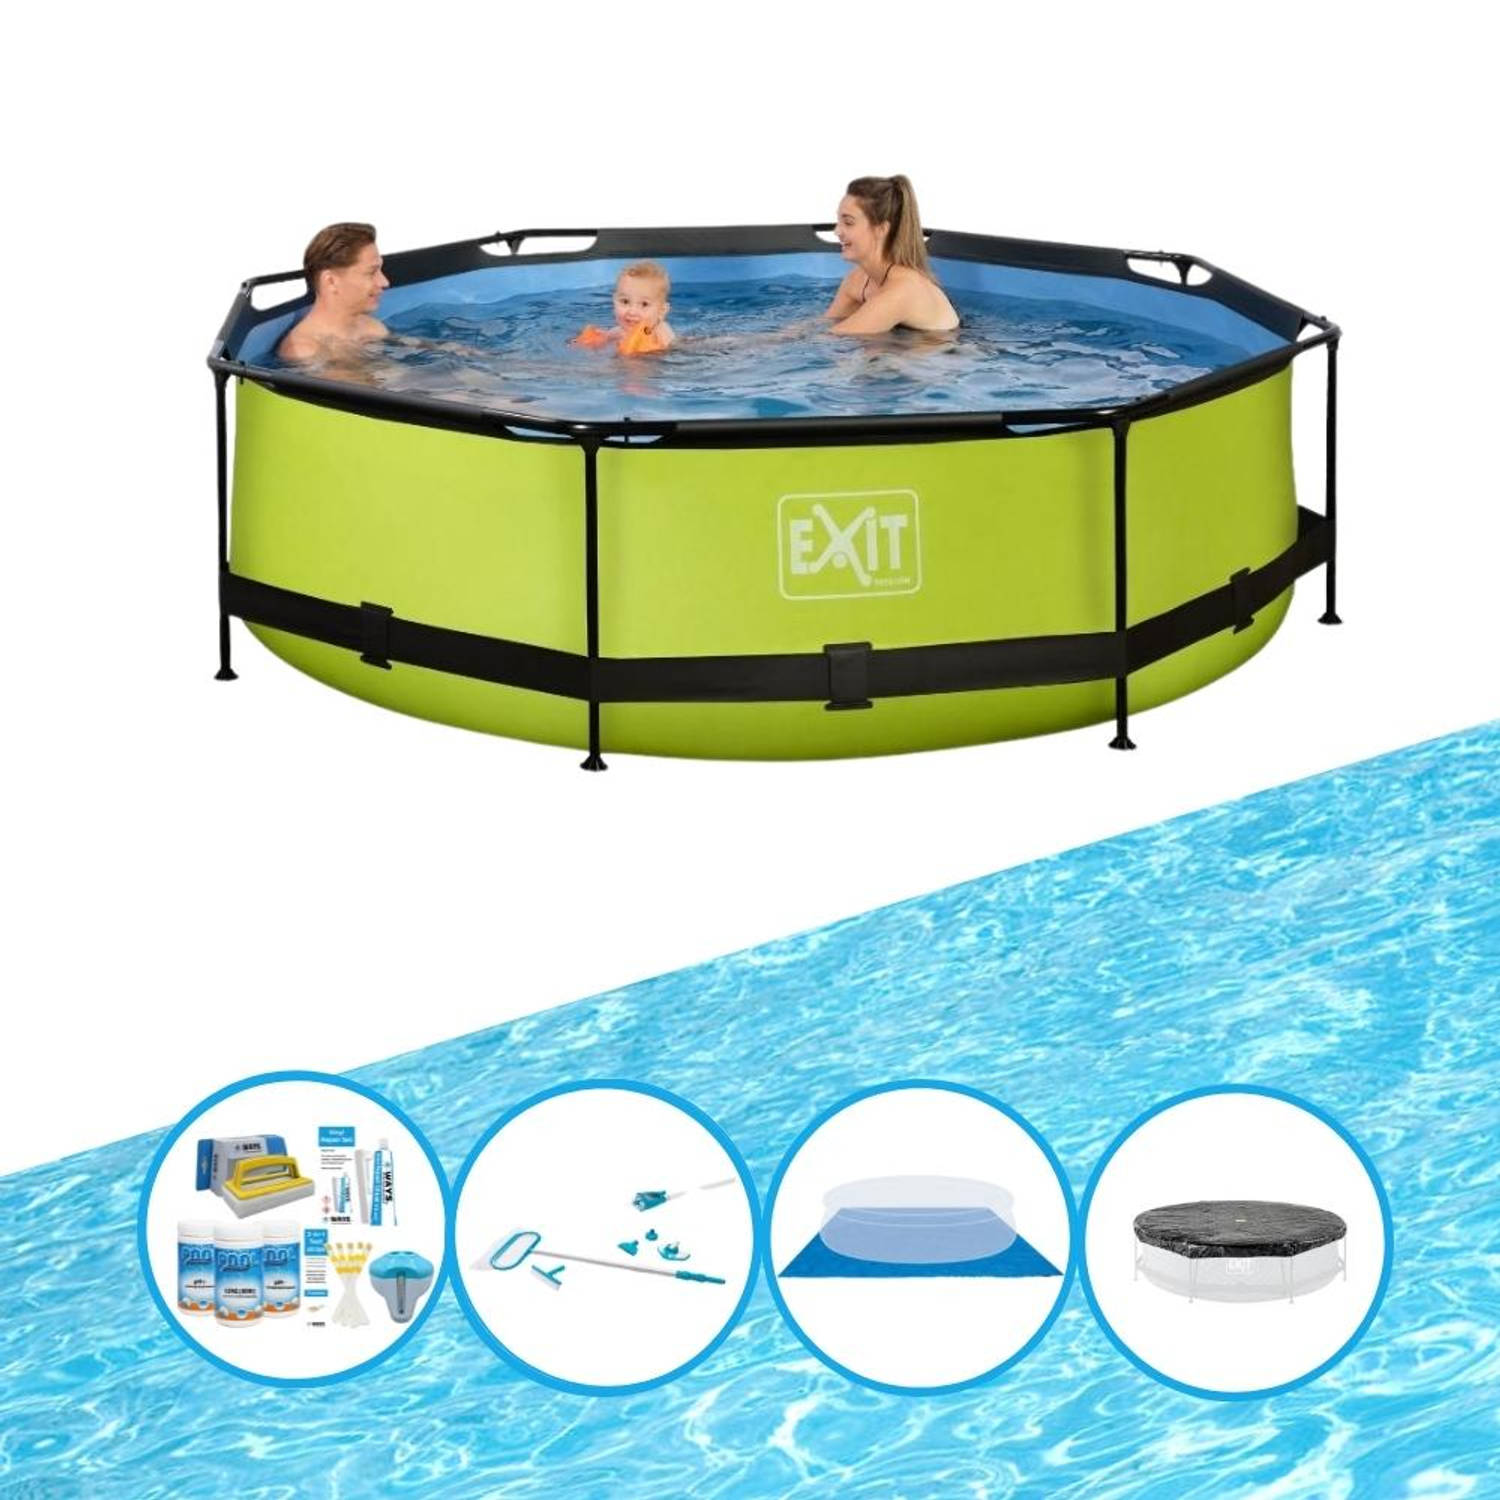 EXIT Toys Exit Zwembad Lime - Frame Pool ø300x76cm - Compleet Zwembadpakket - Groen